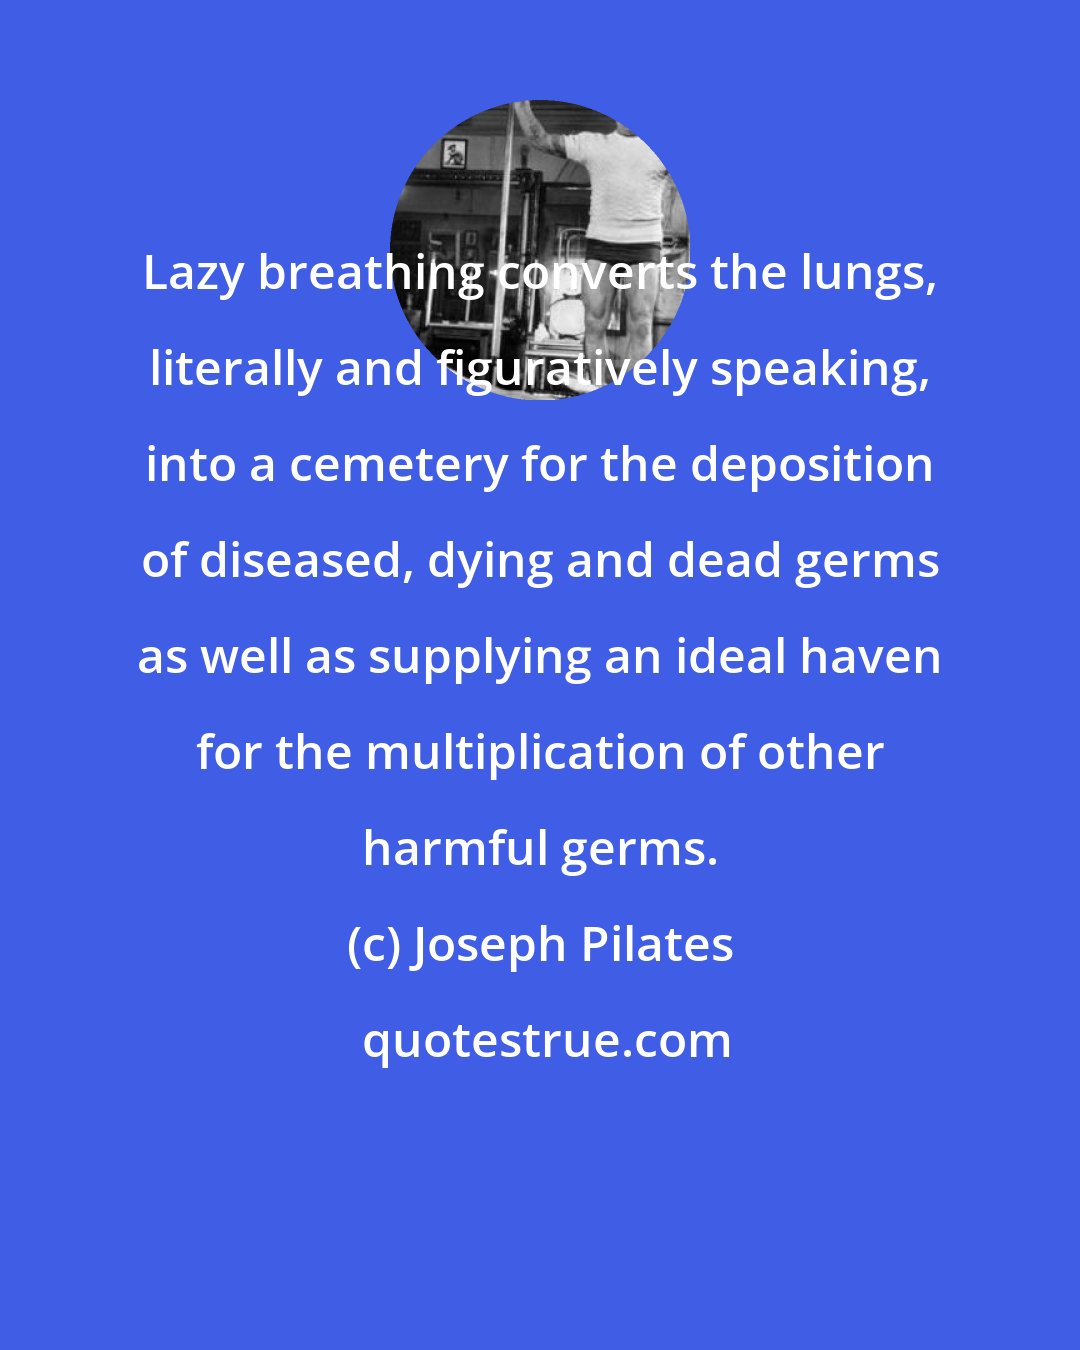 Joseph Pilates: Lazy breathing converts the lungs, literally and figuratively speaking, into a cemetery for the deposition of diseased, dying and dead germs as well as supplying an ideal haven for the multiplication of other harmful germs.